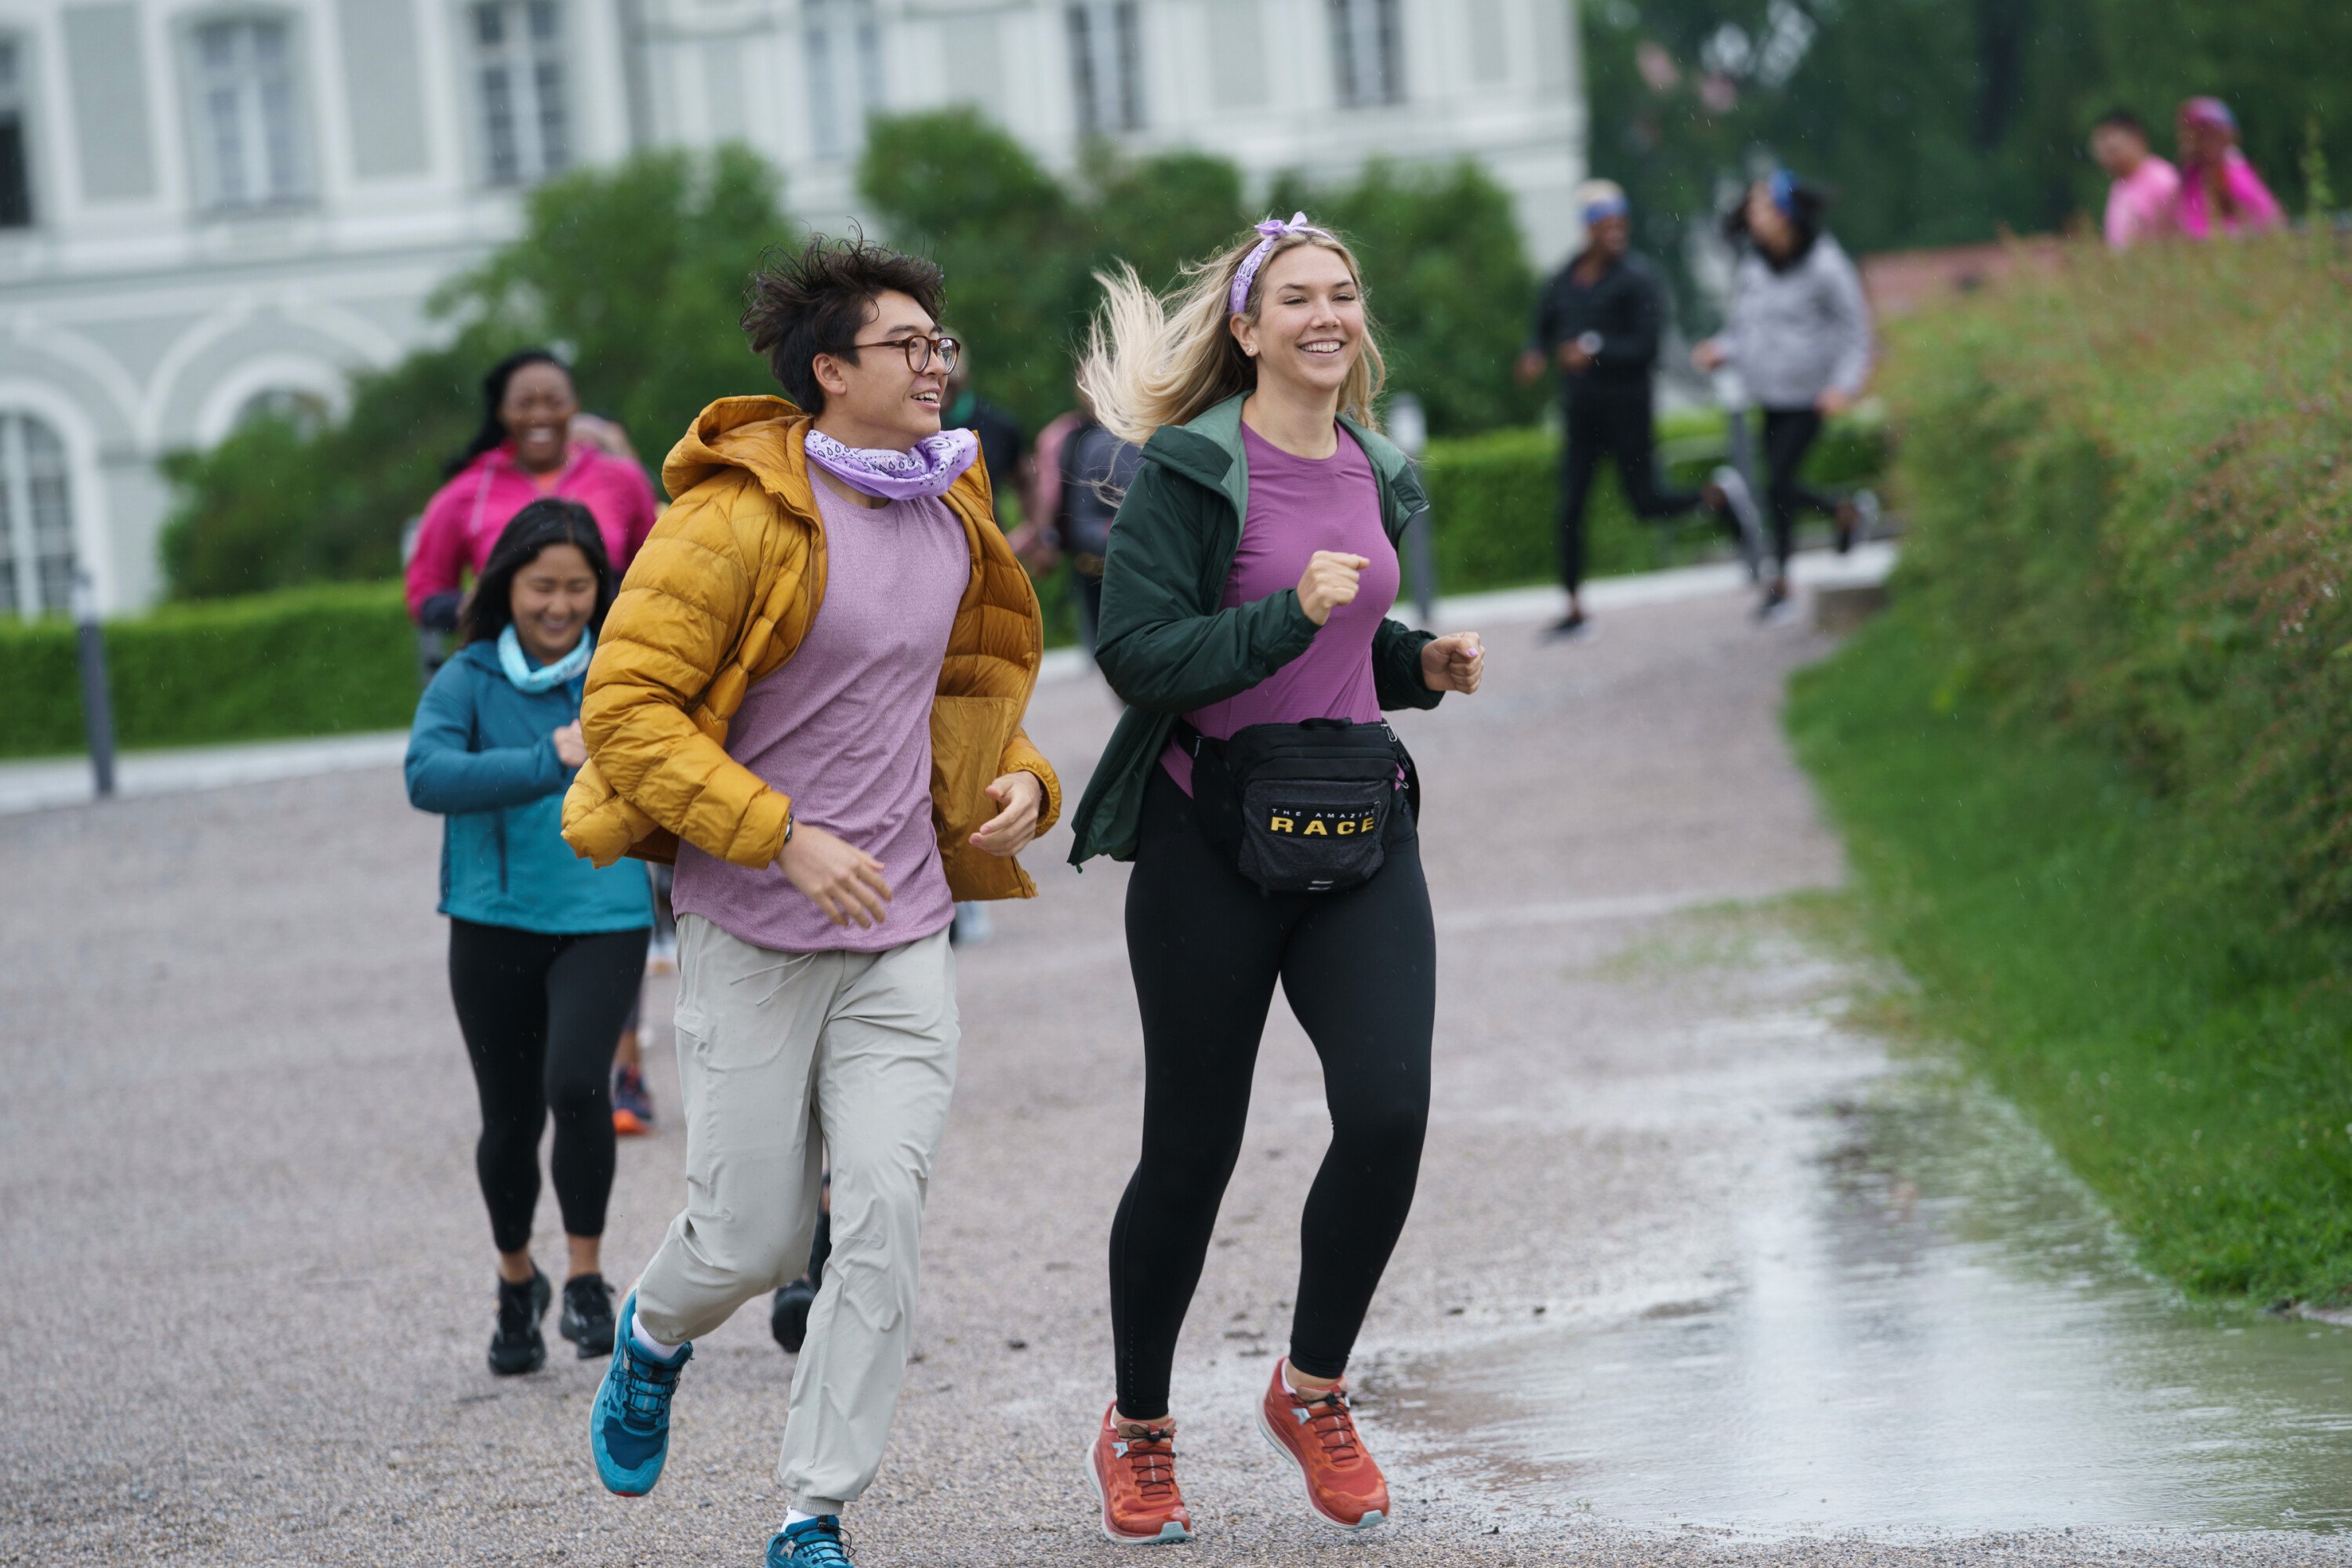 Derek Xiao and Claire Rehfuss, who starred in 'The Amazing Race 34' on CBS, jog toward the starting line. Derek wears a mustard yellow jacket, light purple shirt, white pants, and blue shoes. Claire wears a dark green jacket, purple shirt, black leggings, and burnt red shoes.